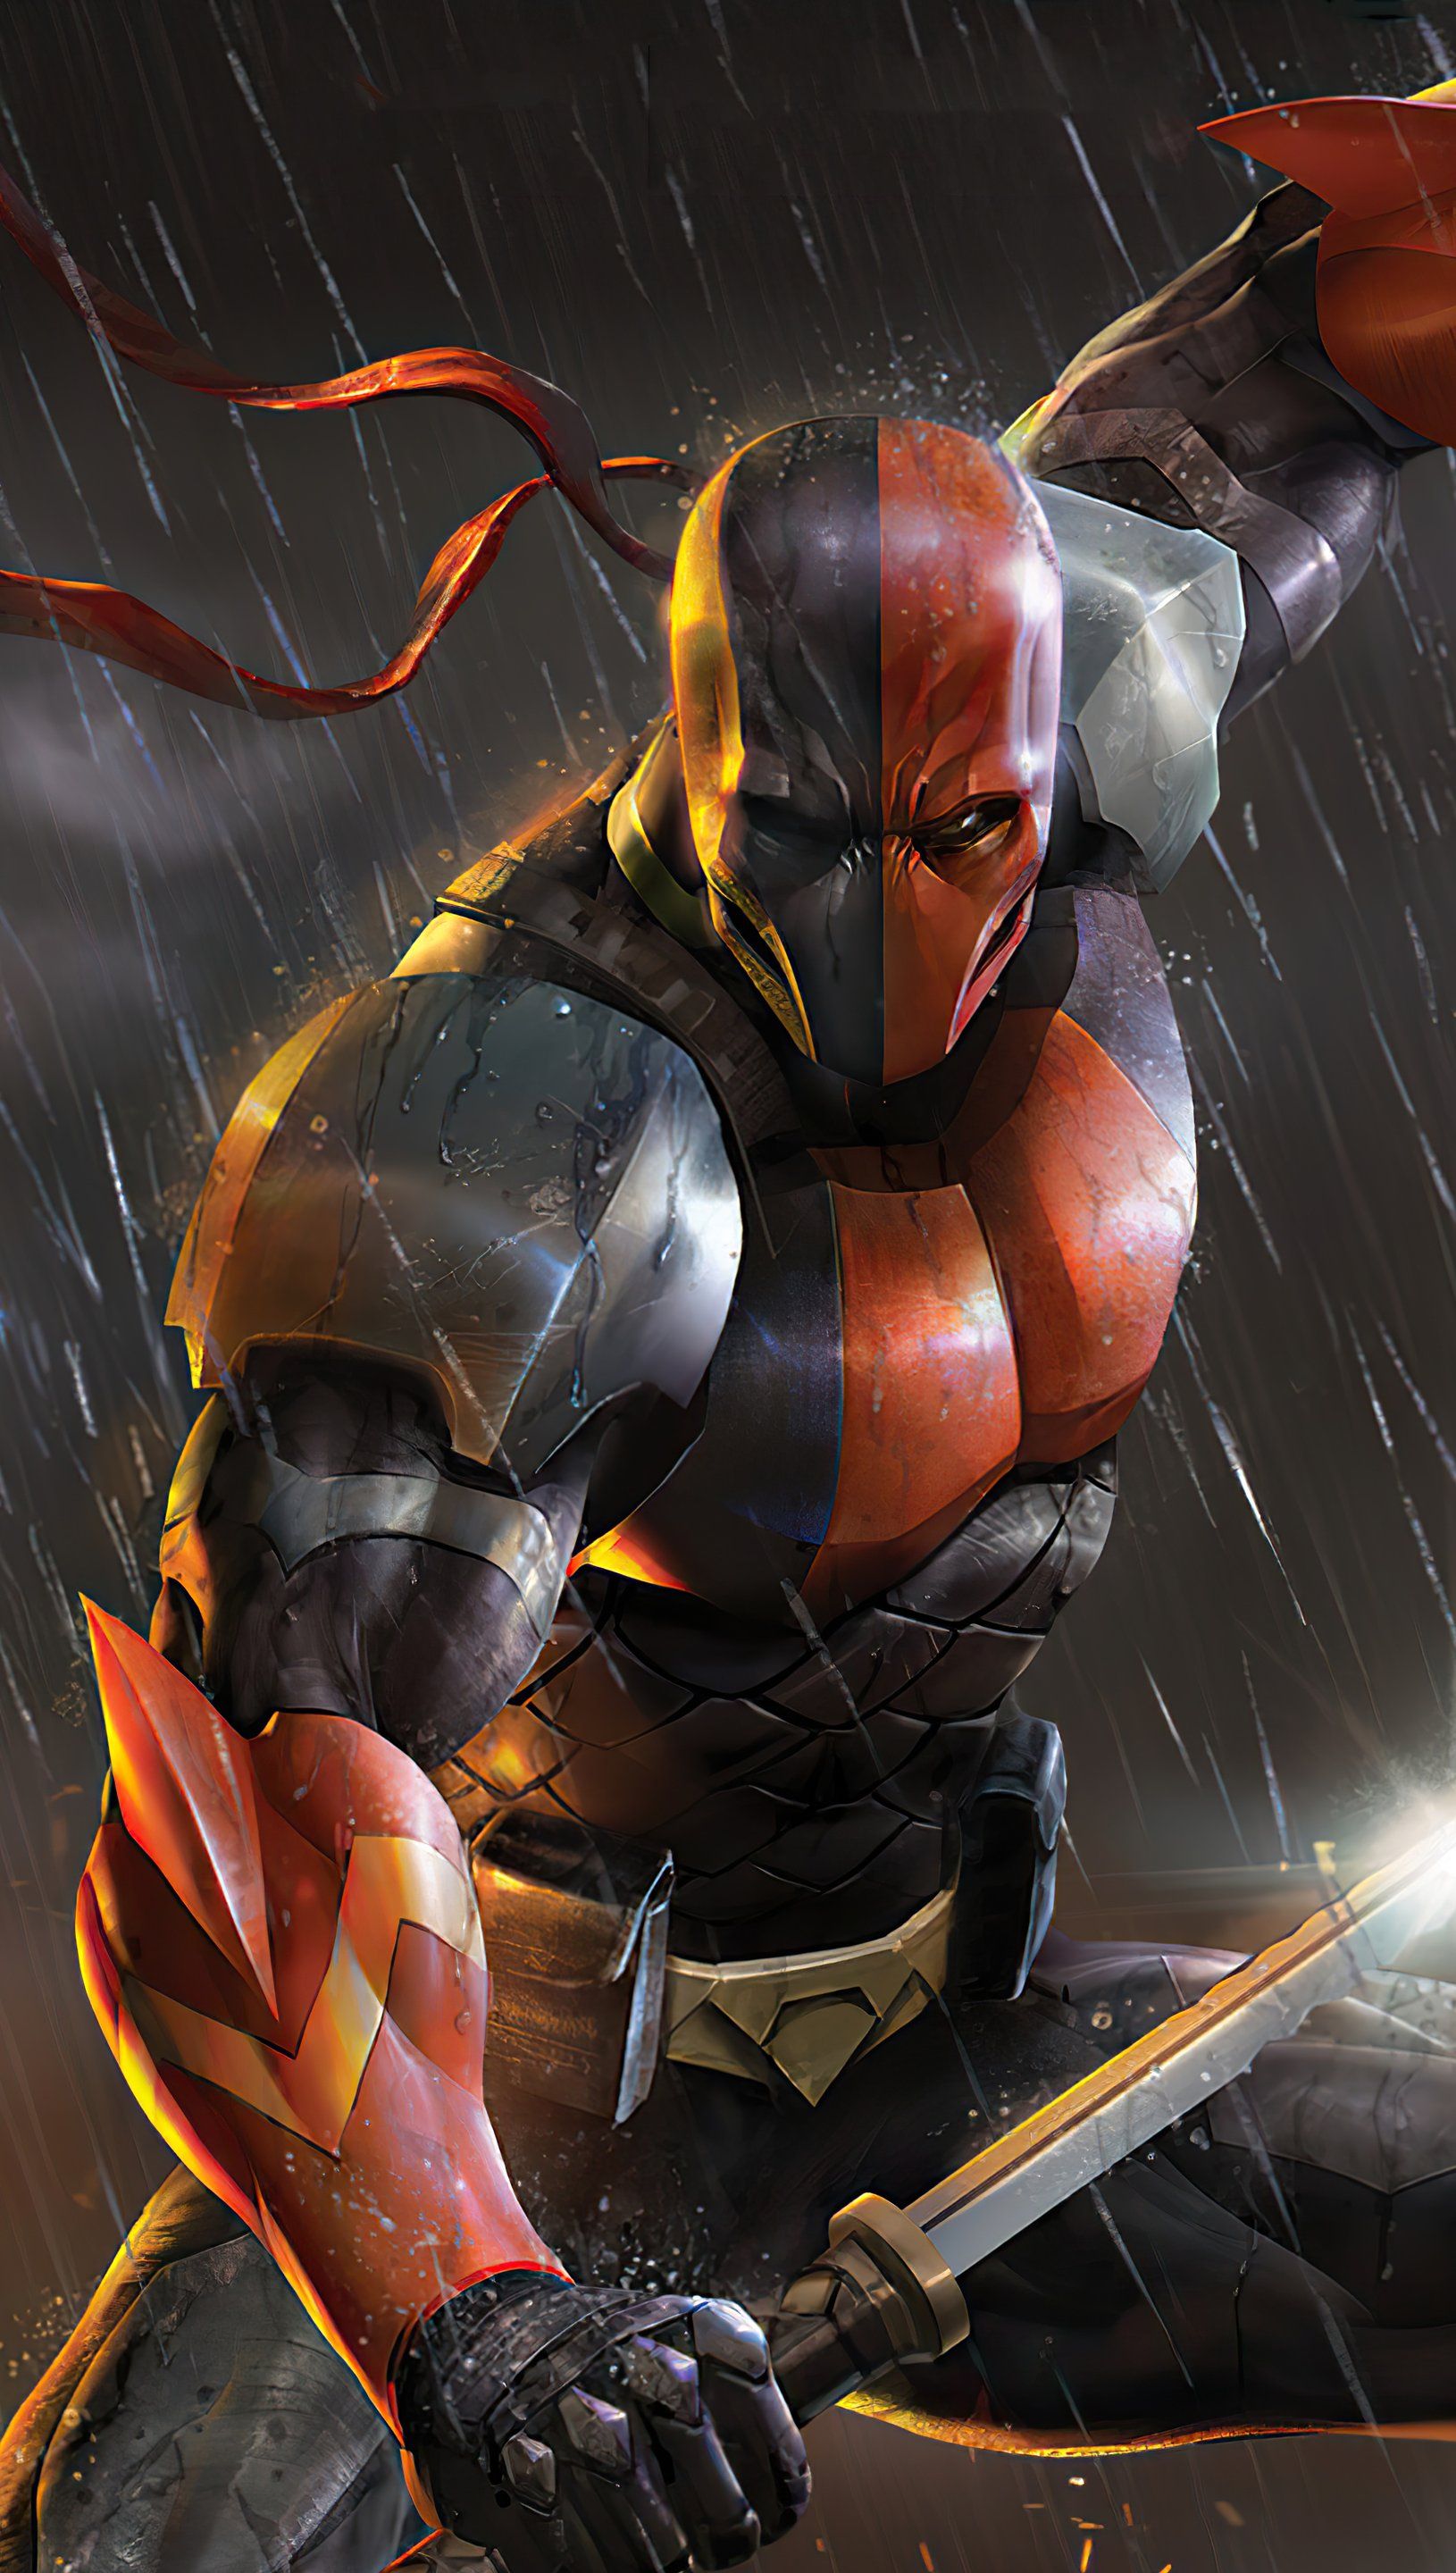 Deathstroke Knights and dragons Wallpaper 5k Ultra HD